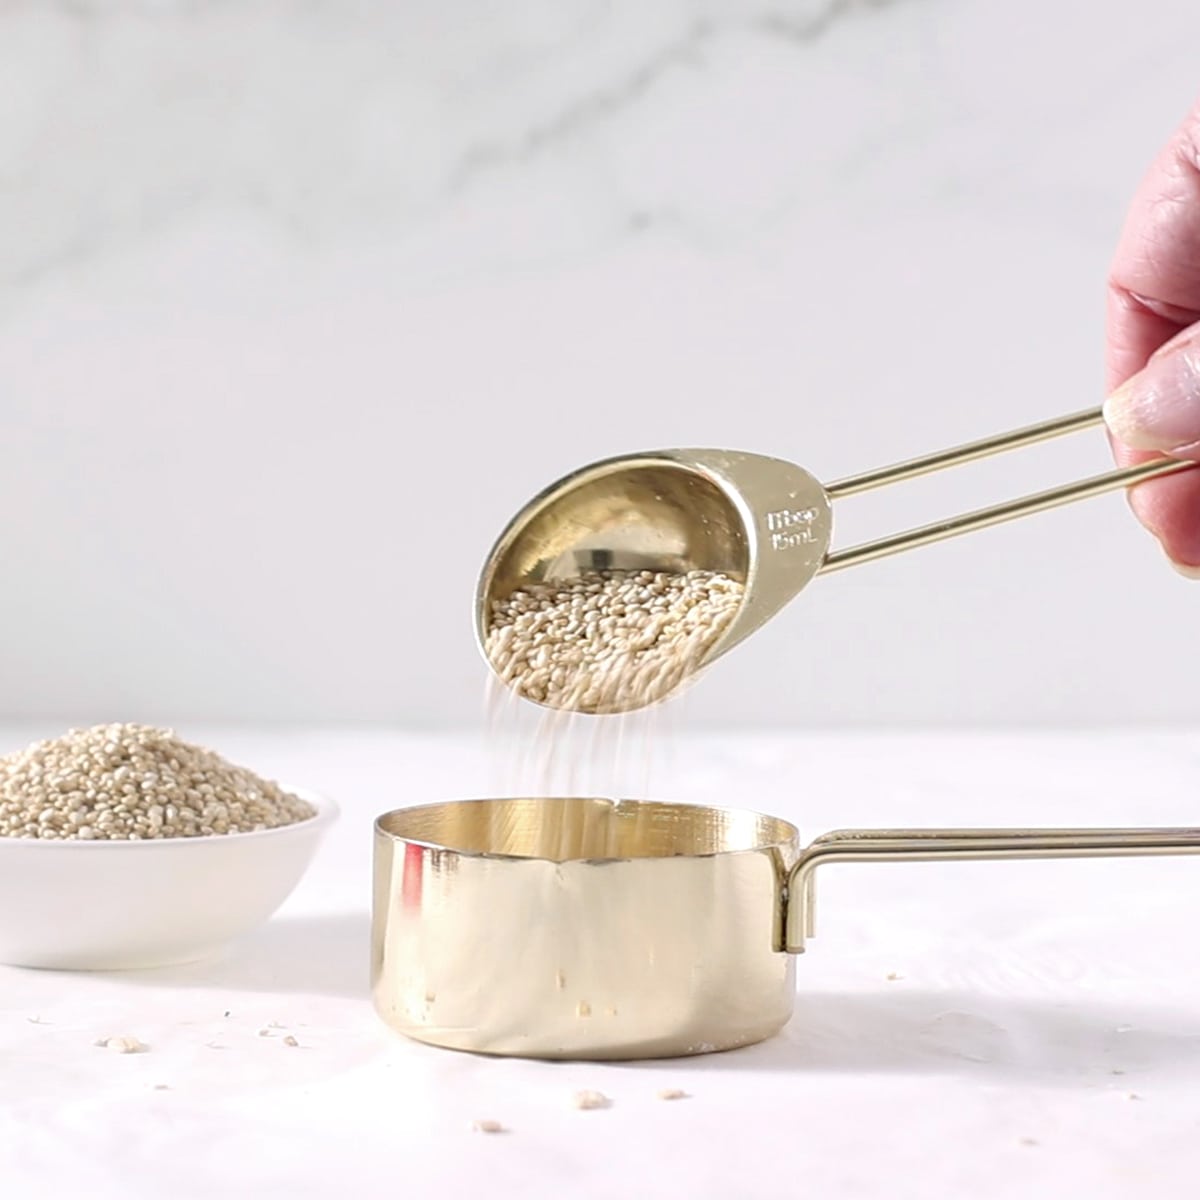 pouring quinoa into a ½ cup with a tablespoon.